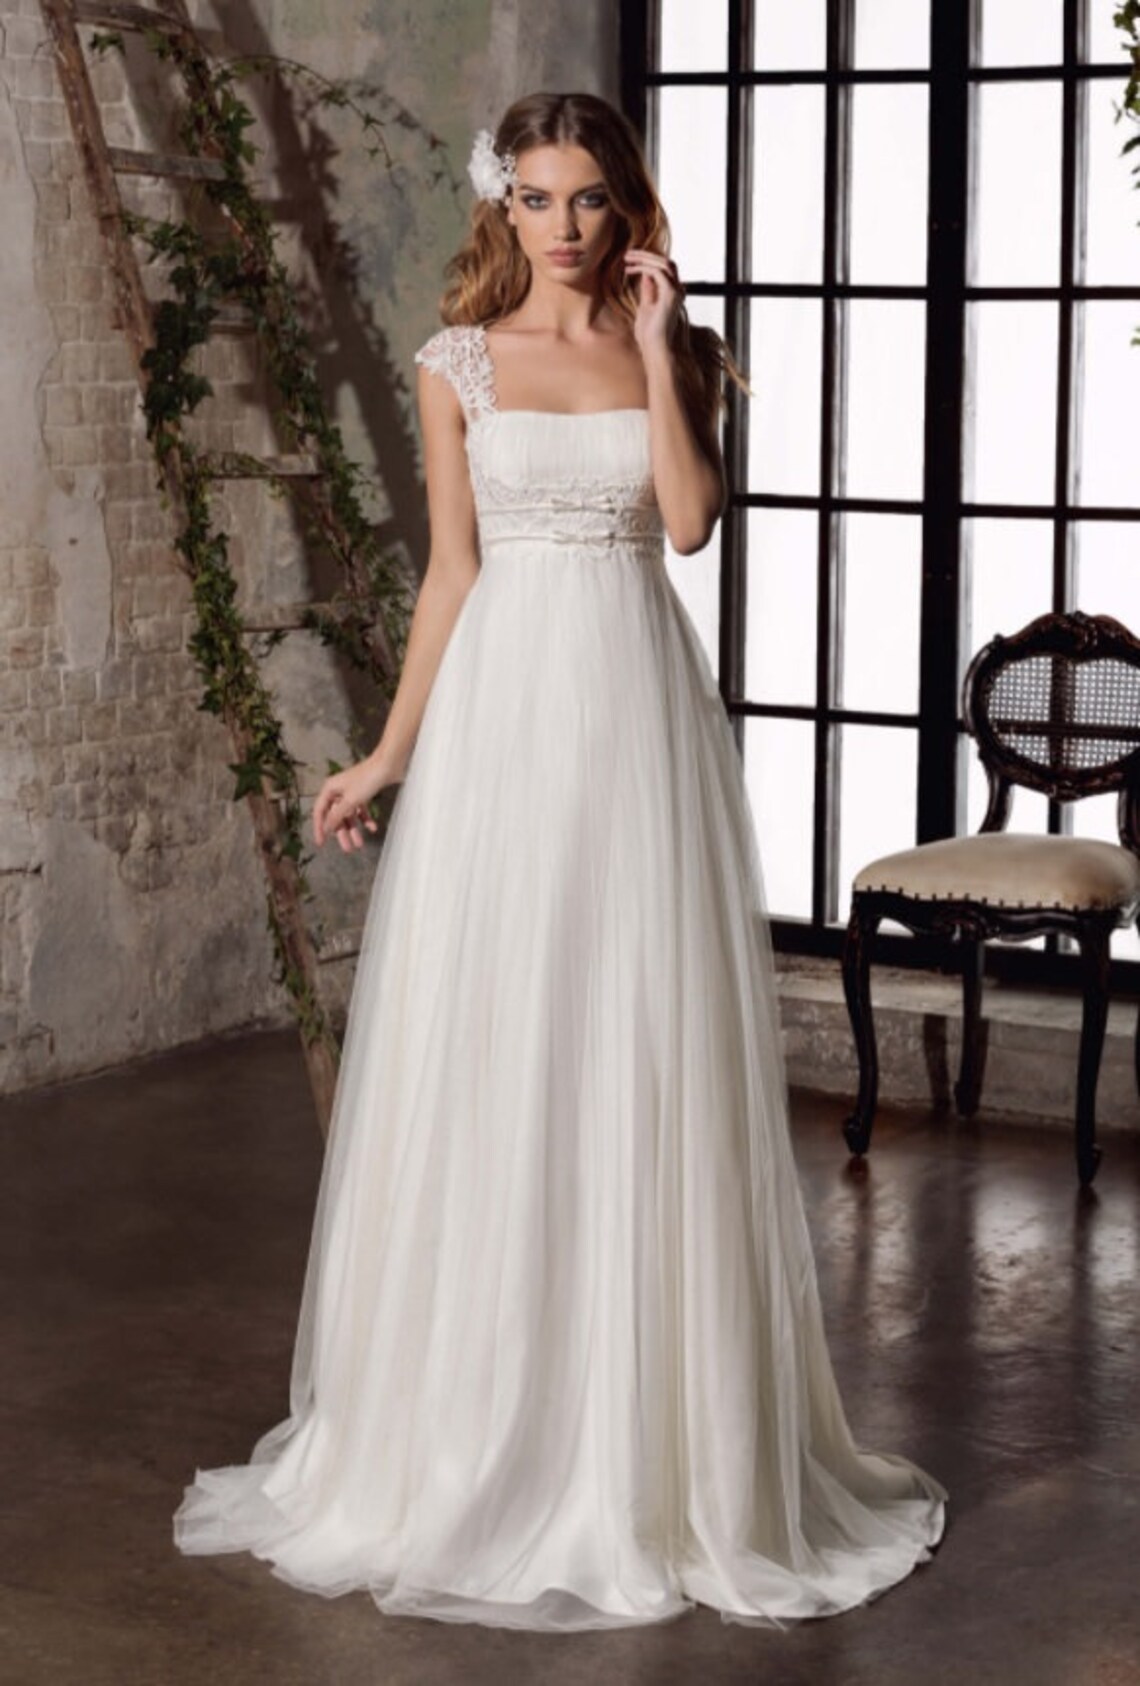 Wedding Dress Silhouettes: The Complete Style Guide - Zola Expert